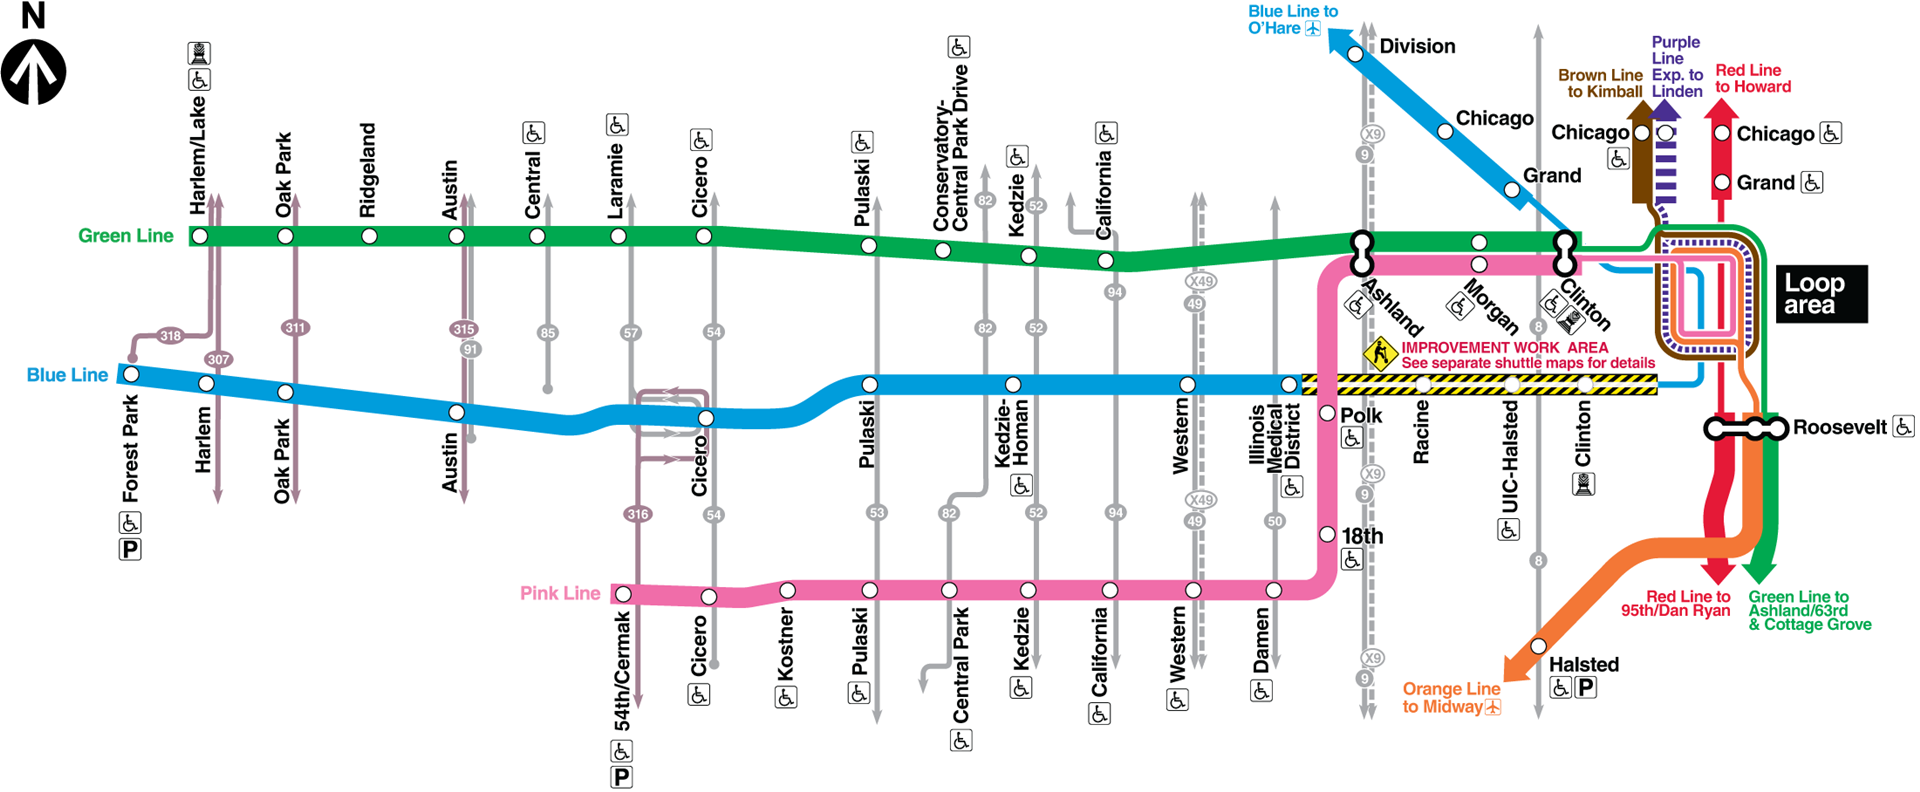 Map showing alternate service during Blue Line line cut.